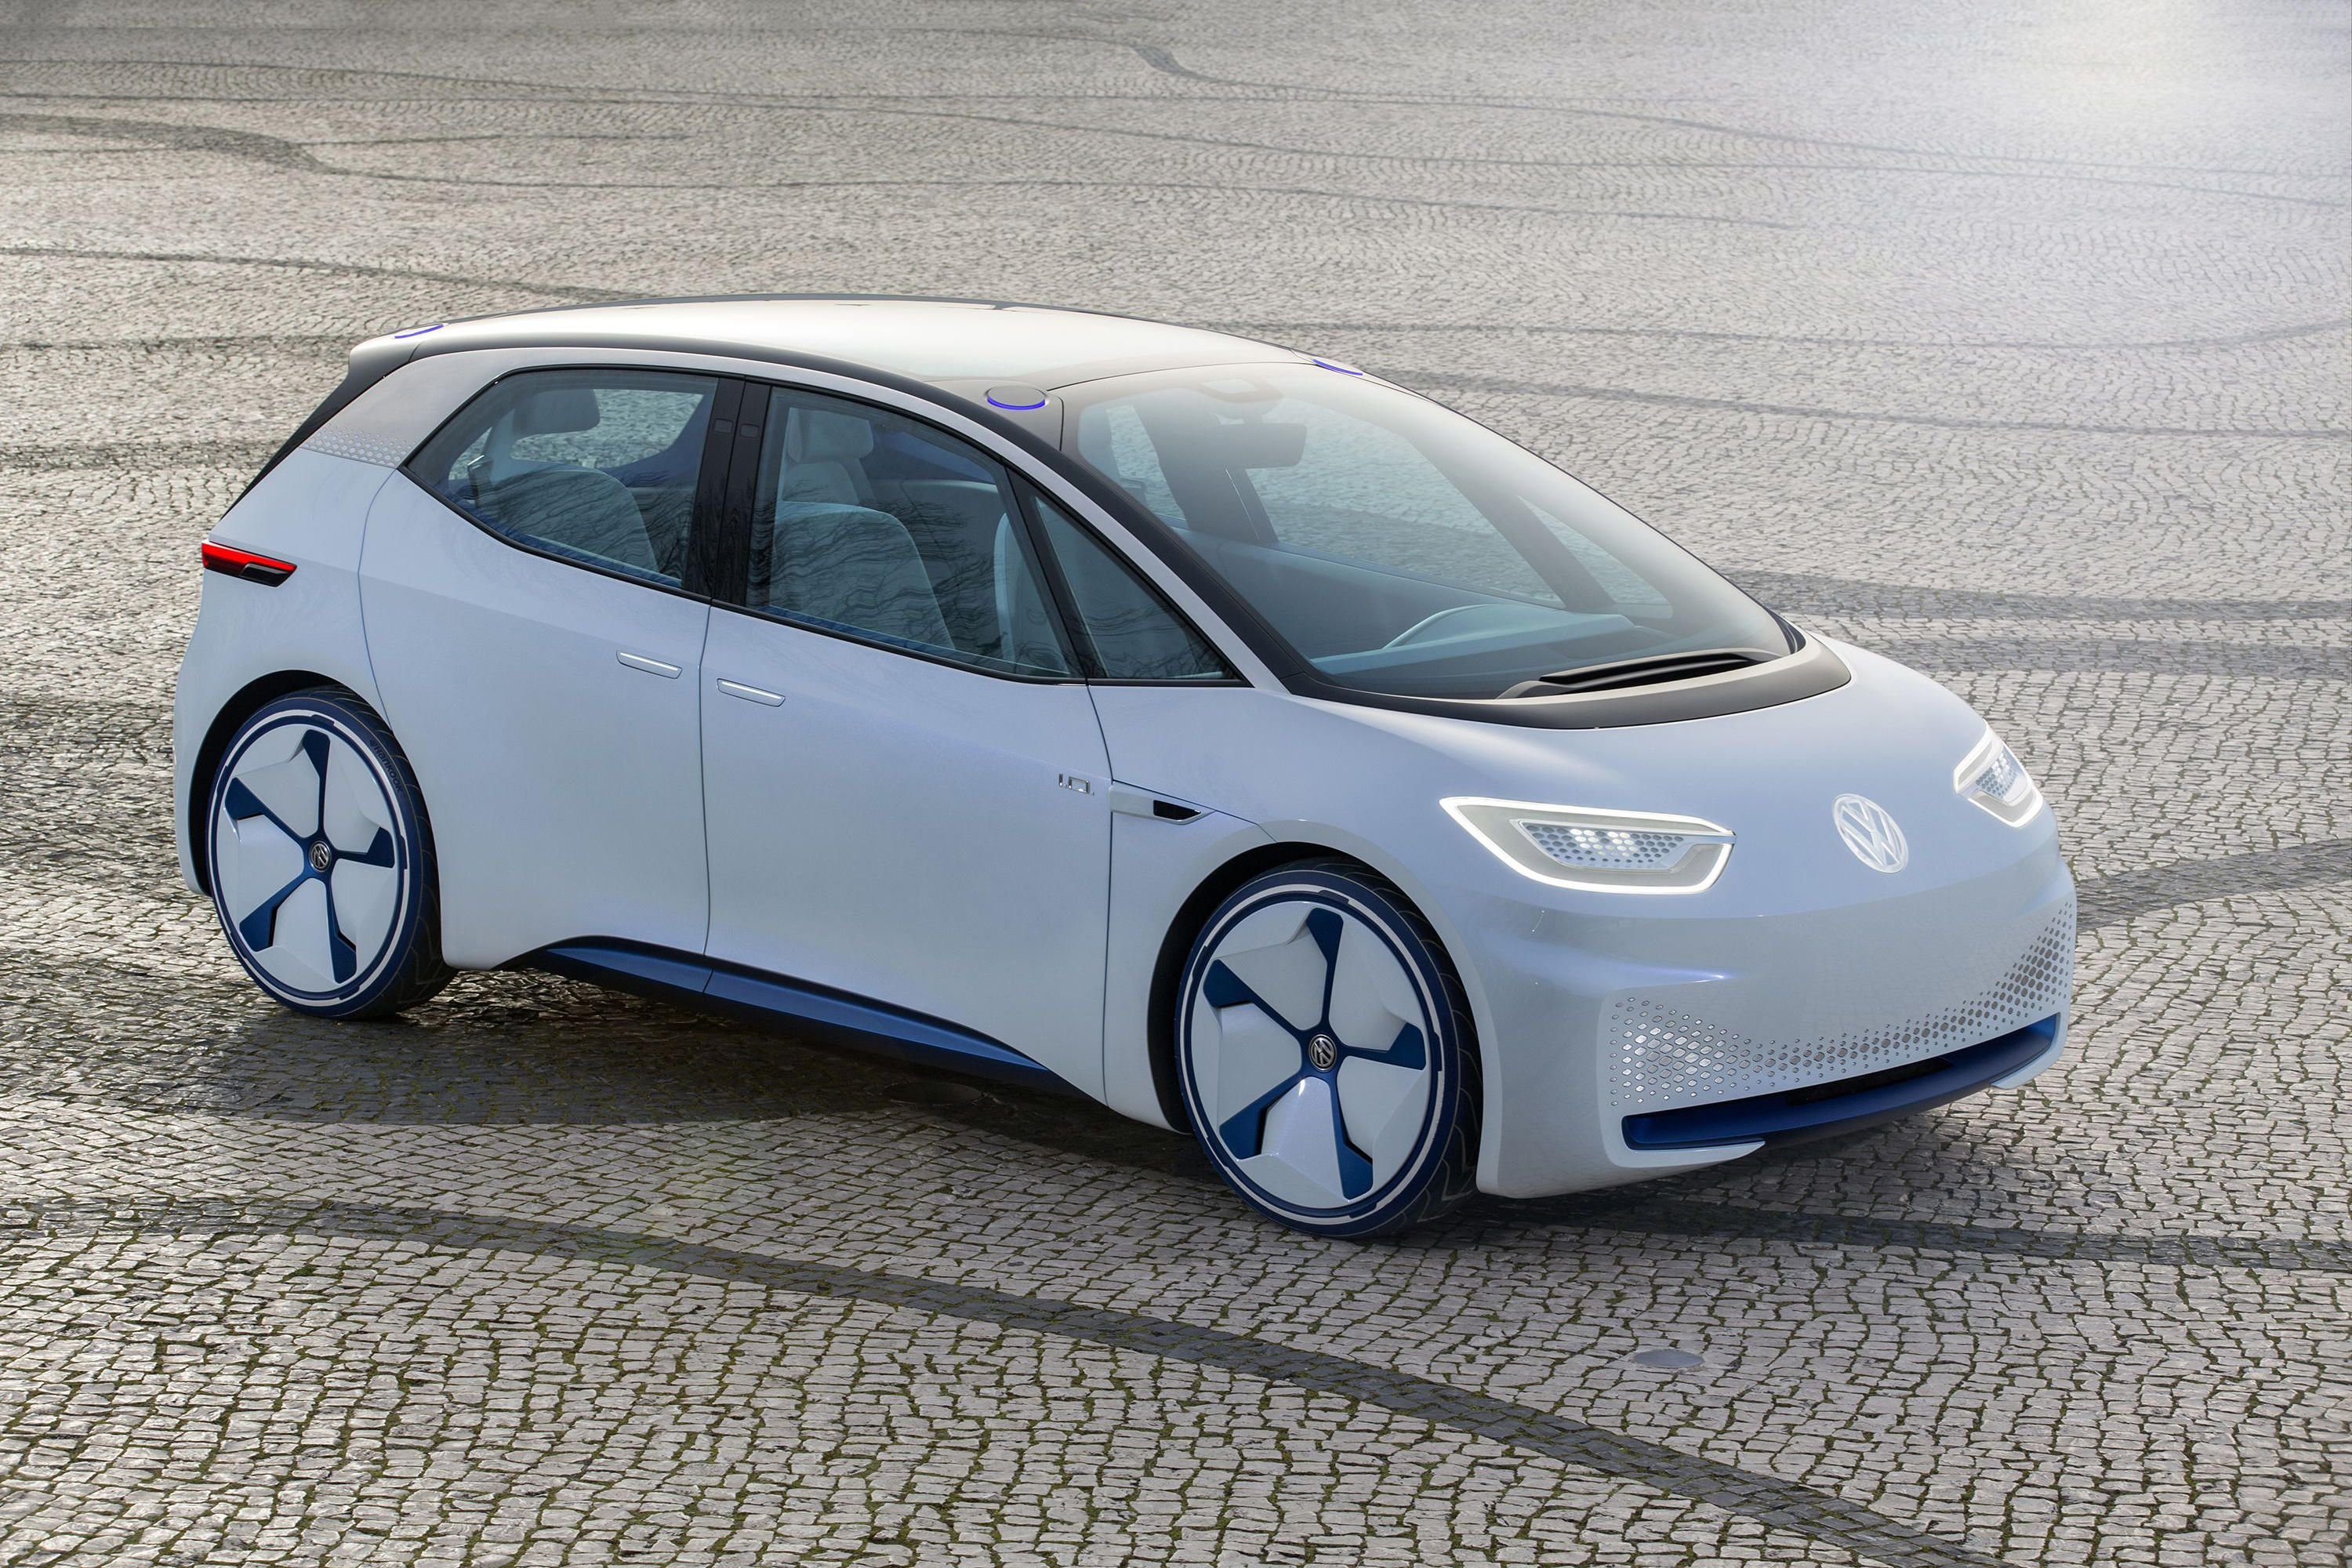 VW's electric future: Is the ID.Life not coming after all?